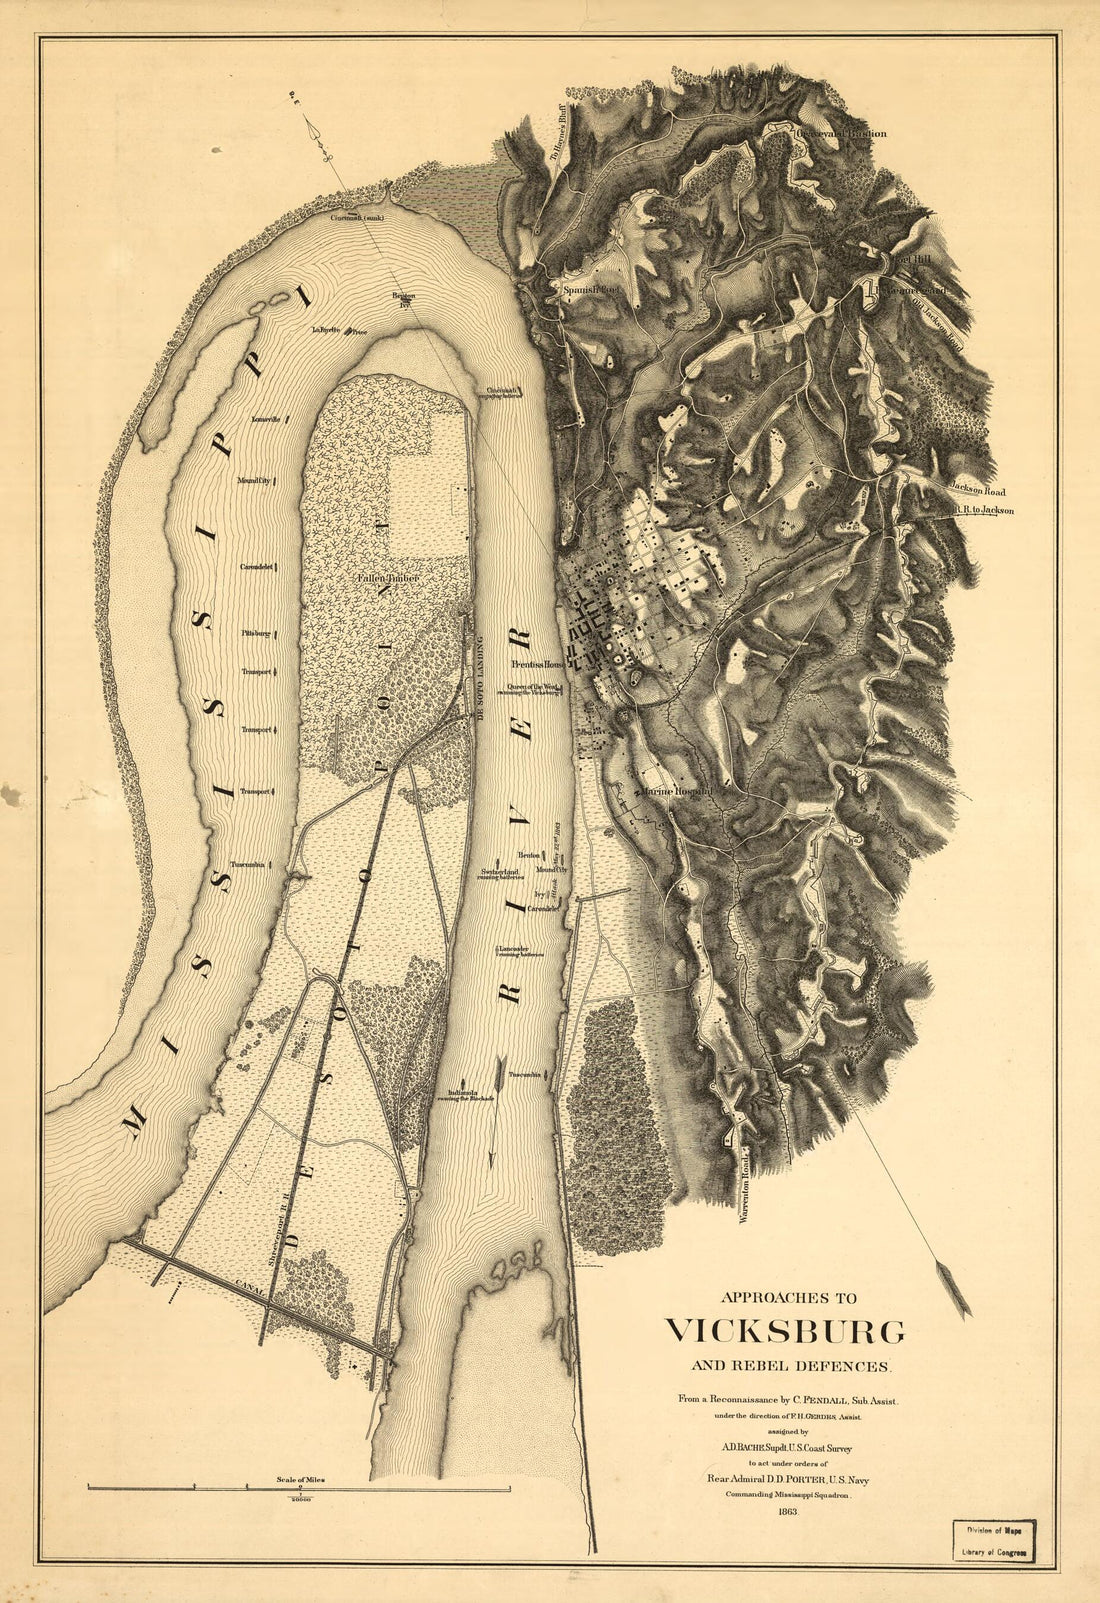 This old map of Approaches to Vicksburg and Rebel Defences from 1863 was created by C. Fendall in 1863